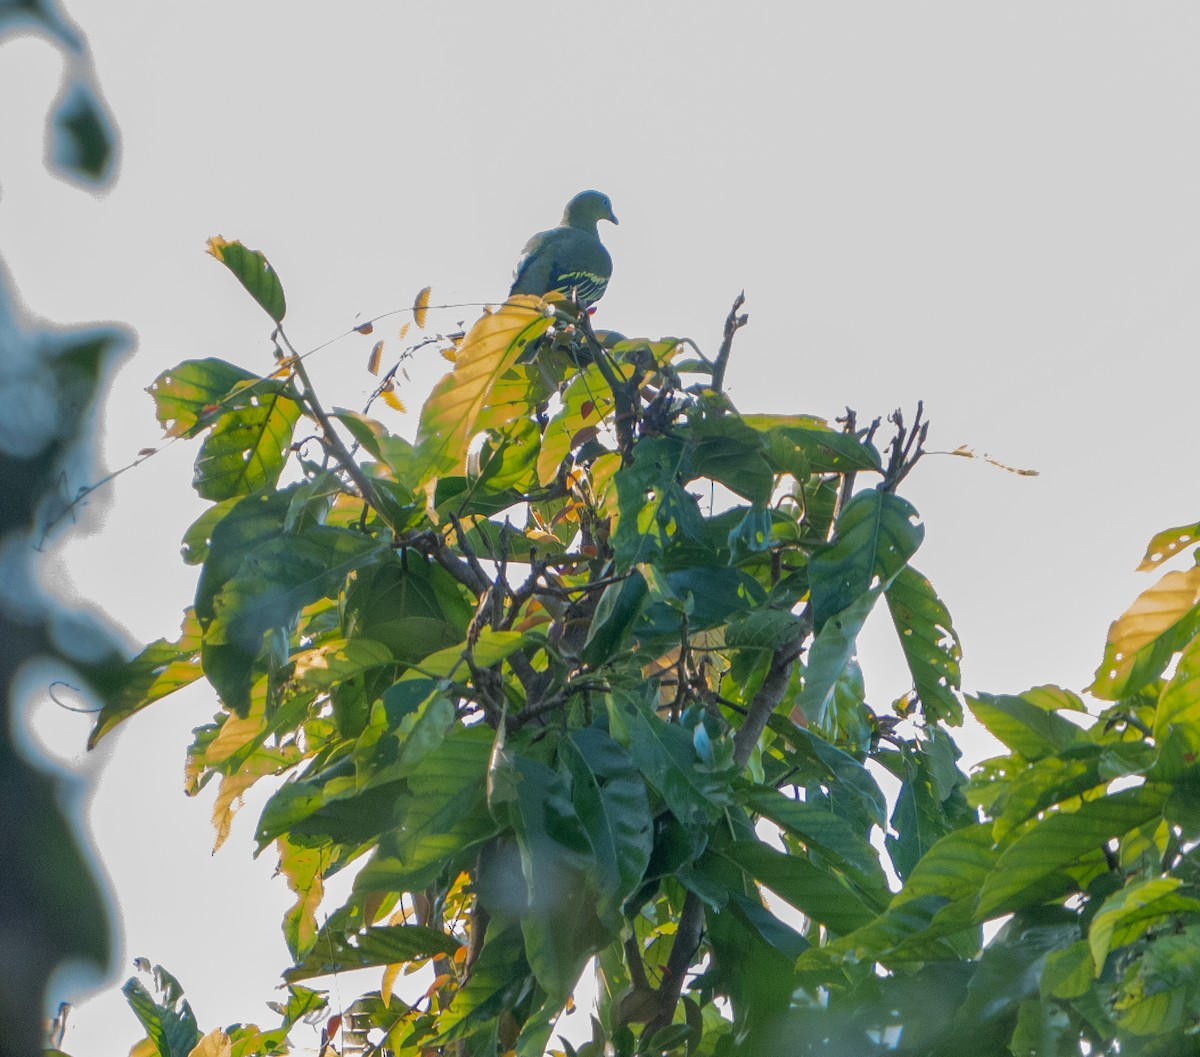 Philippine Green-Pigeon - Kevin Pearce